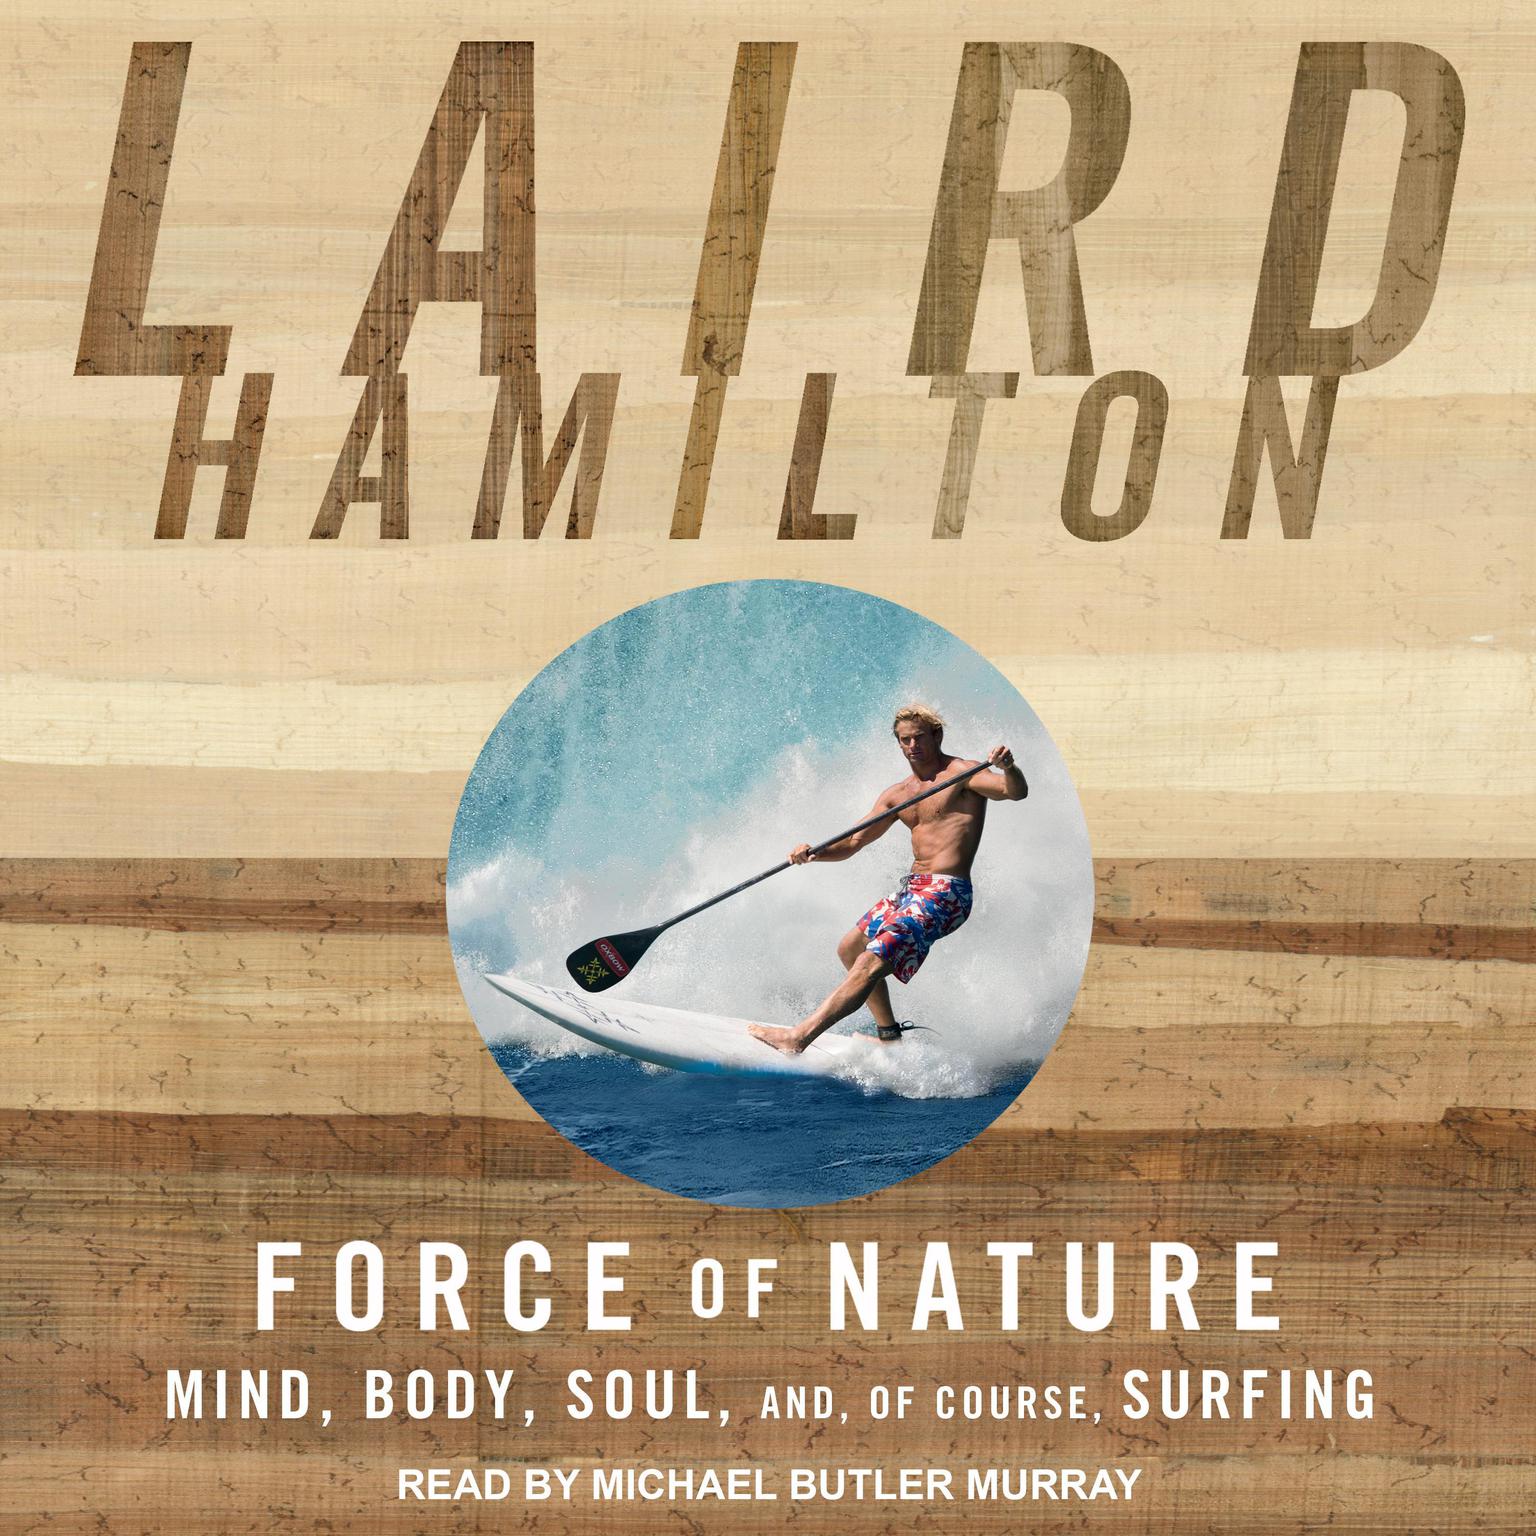 Force of Nature: Mind, Body, Soul, And, of Course, Surfing Audiobook, by Laird Hamilton